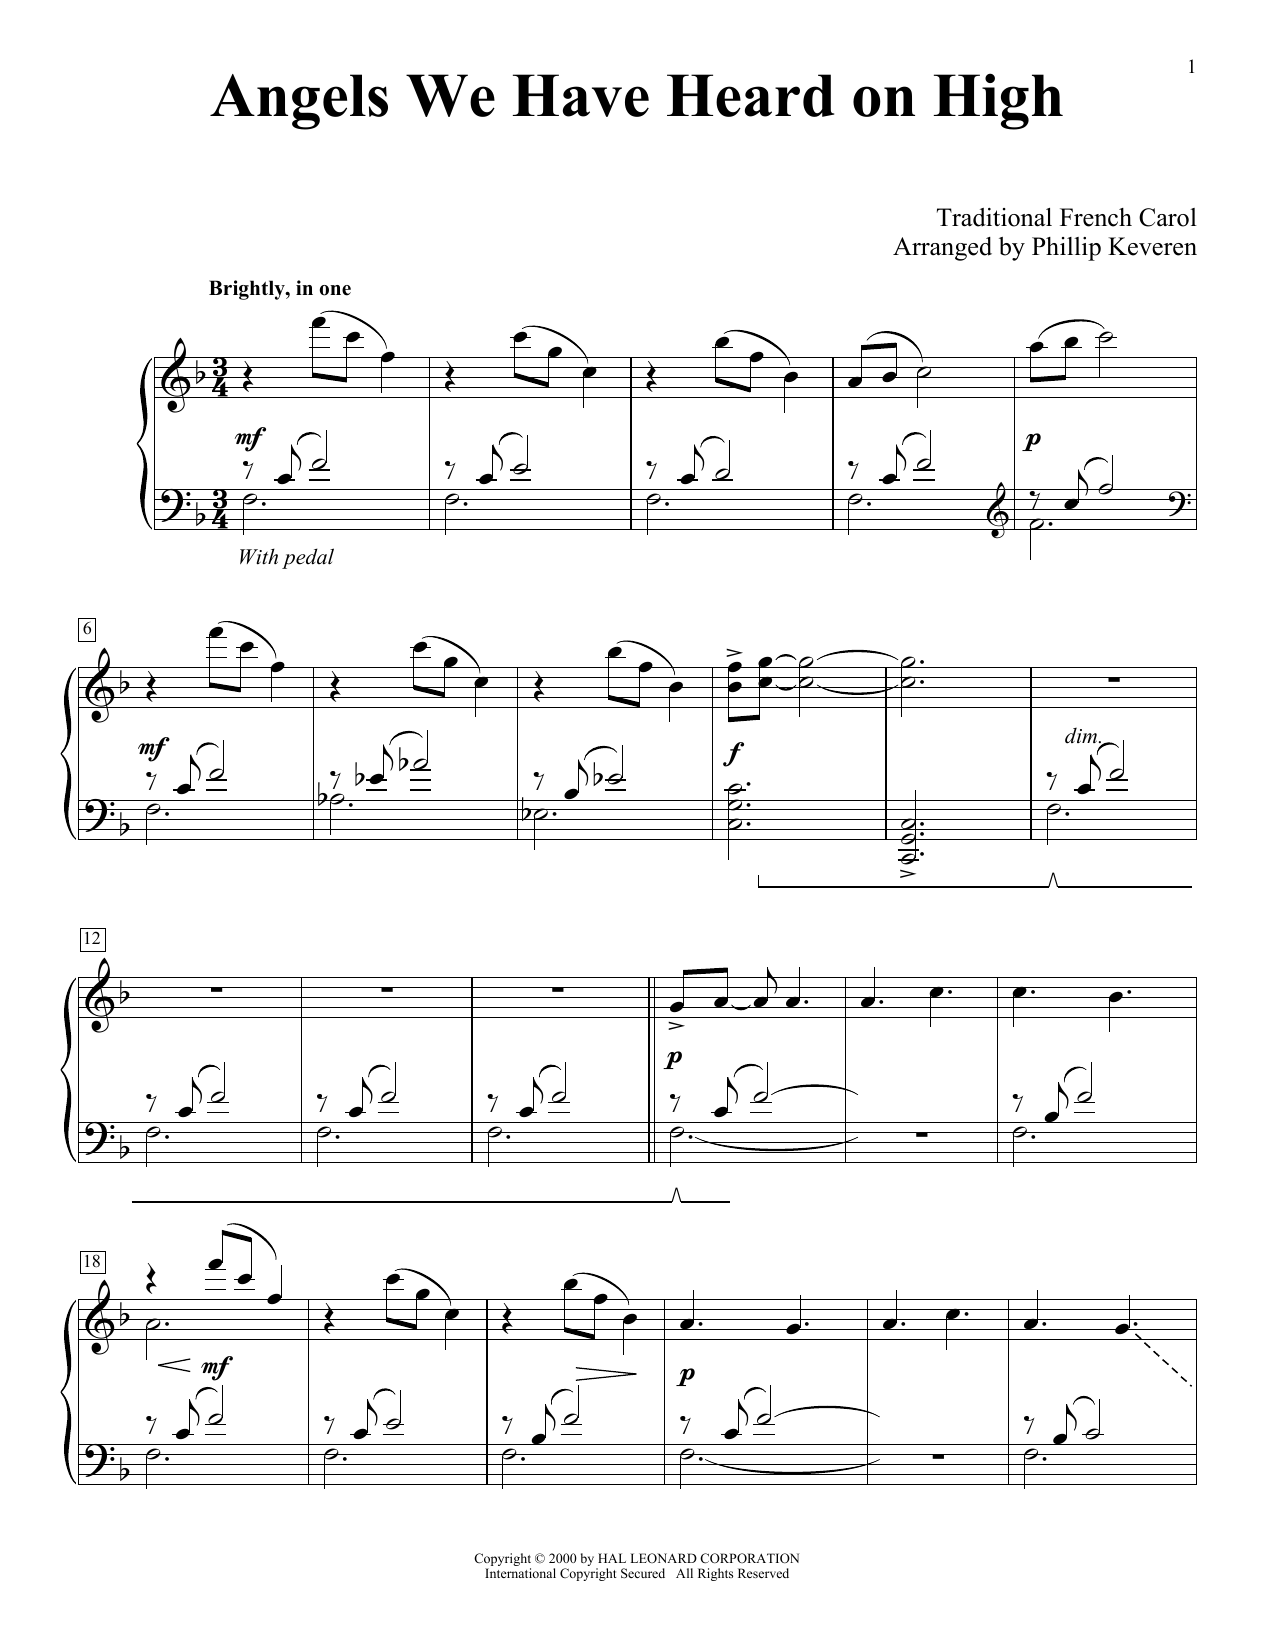 Traditional French Carol Angels We Have Heard On High (arr. Phillip Keveren) sheet music notes printable PDF score